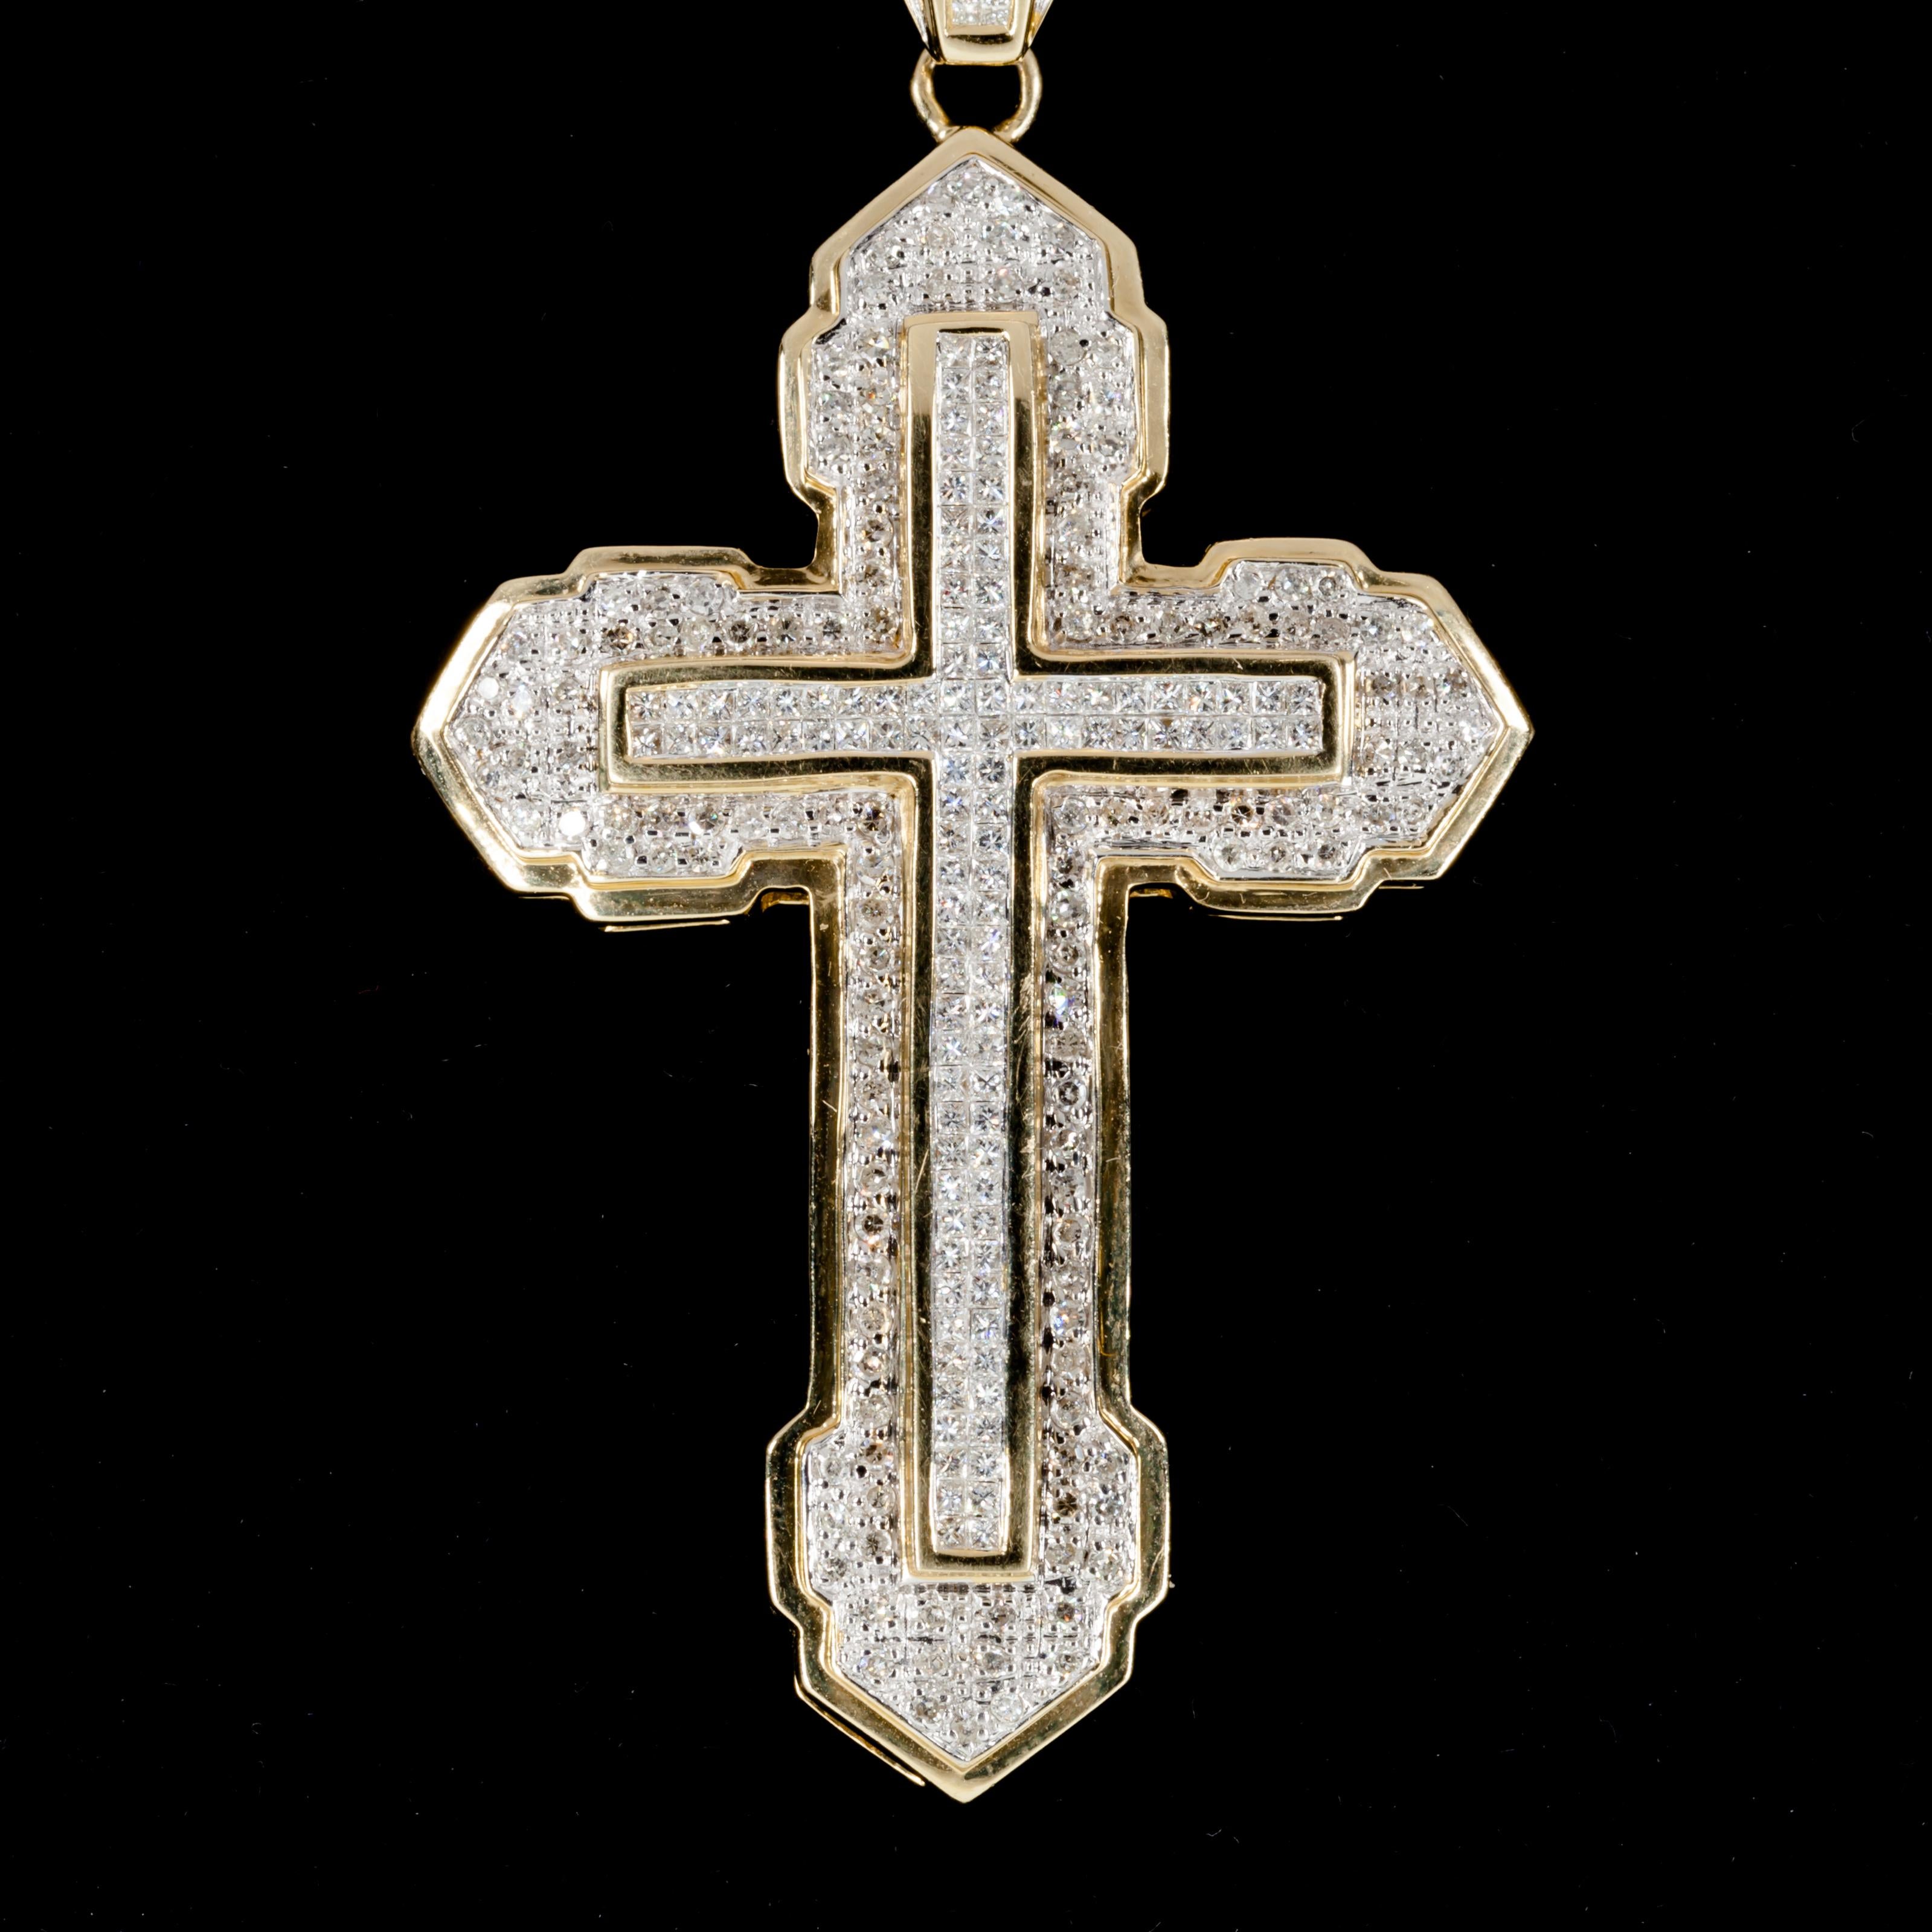 Beautiful Diamond Cross Pendant in 14k White and Yellow Gold
Features Princess Cut Invisible Set Interior Plaque with Round Pave Borders
Delicate 14k Yellow Gold Gallery
Total Diamond Weight = Approximately 6 carats
Average Color = G - H
Average